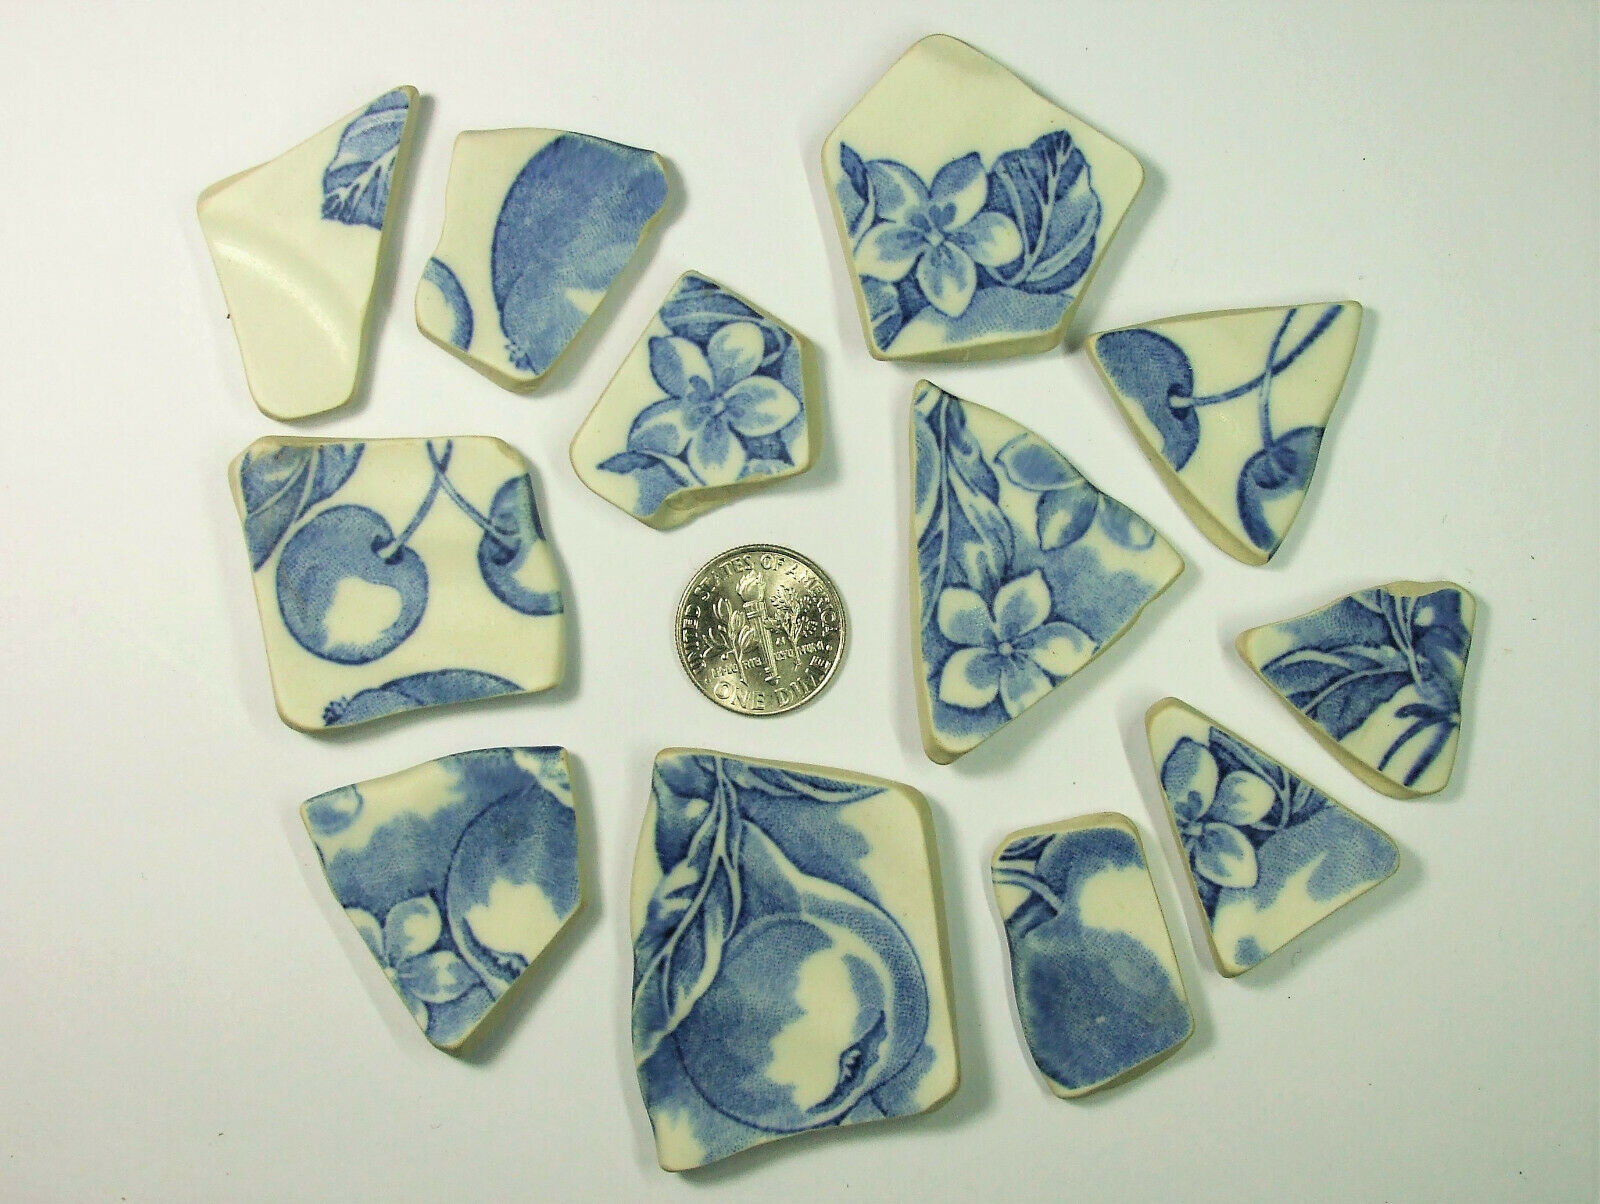 Blue & White Fruit & Flowers Cultured Sea Glass & Pottery Shards